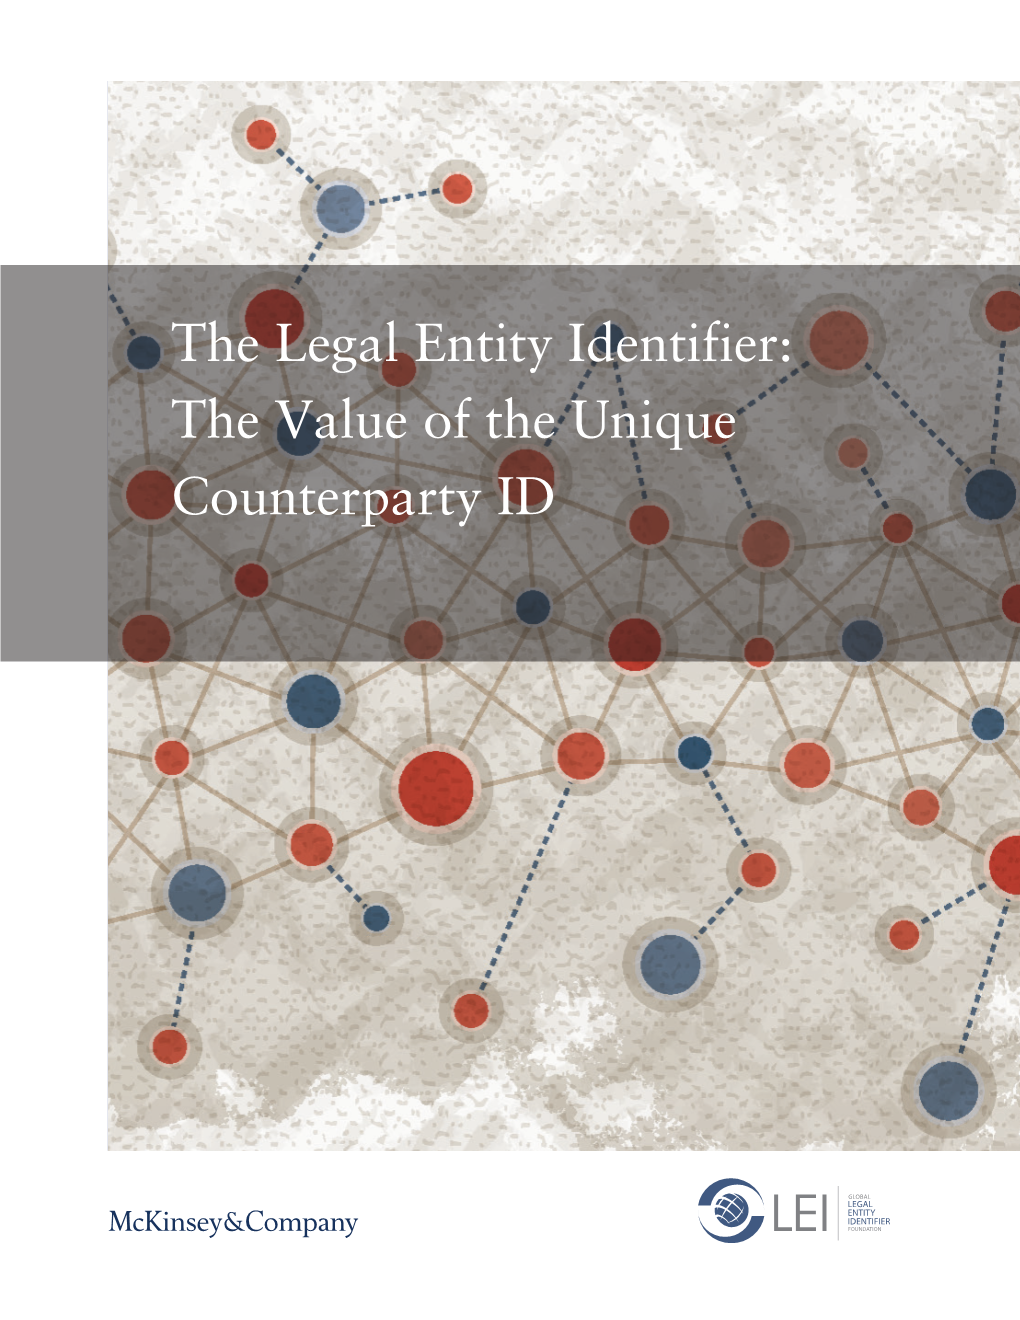 The Legal Entity Identifier: the Value of the Unique Counterparty ID